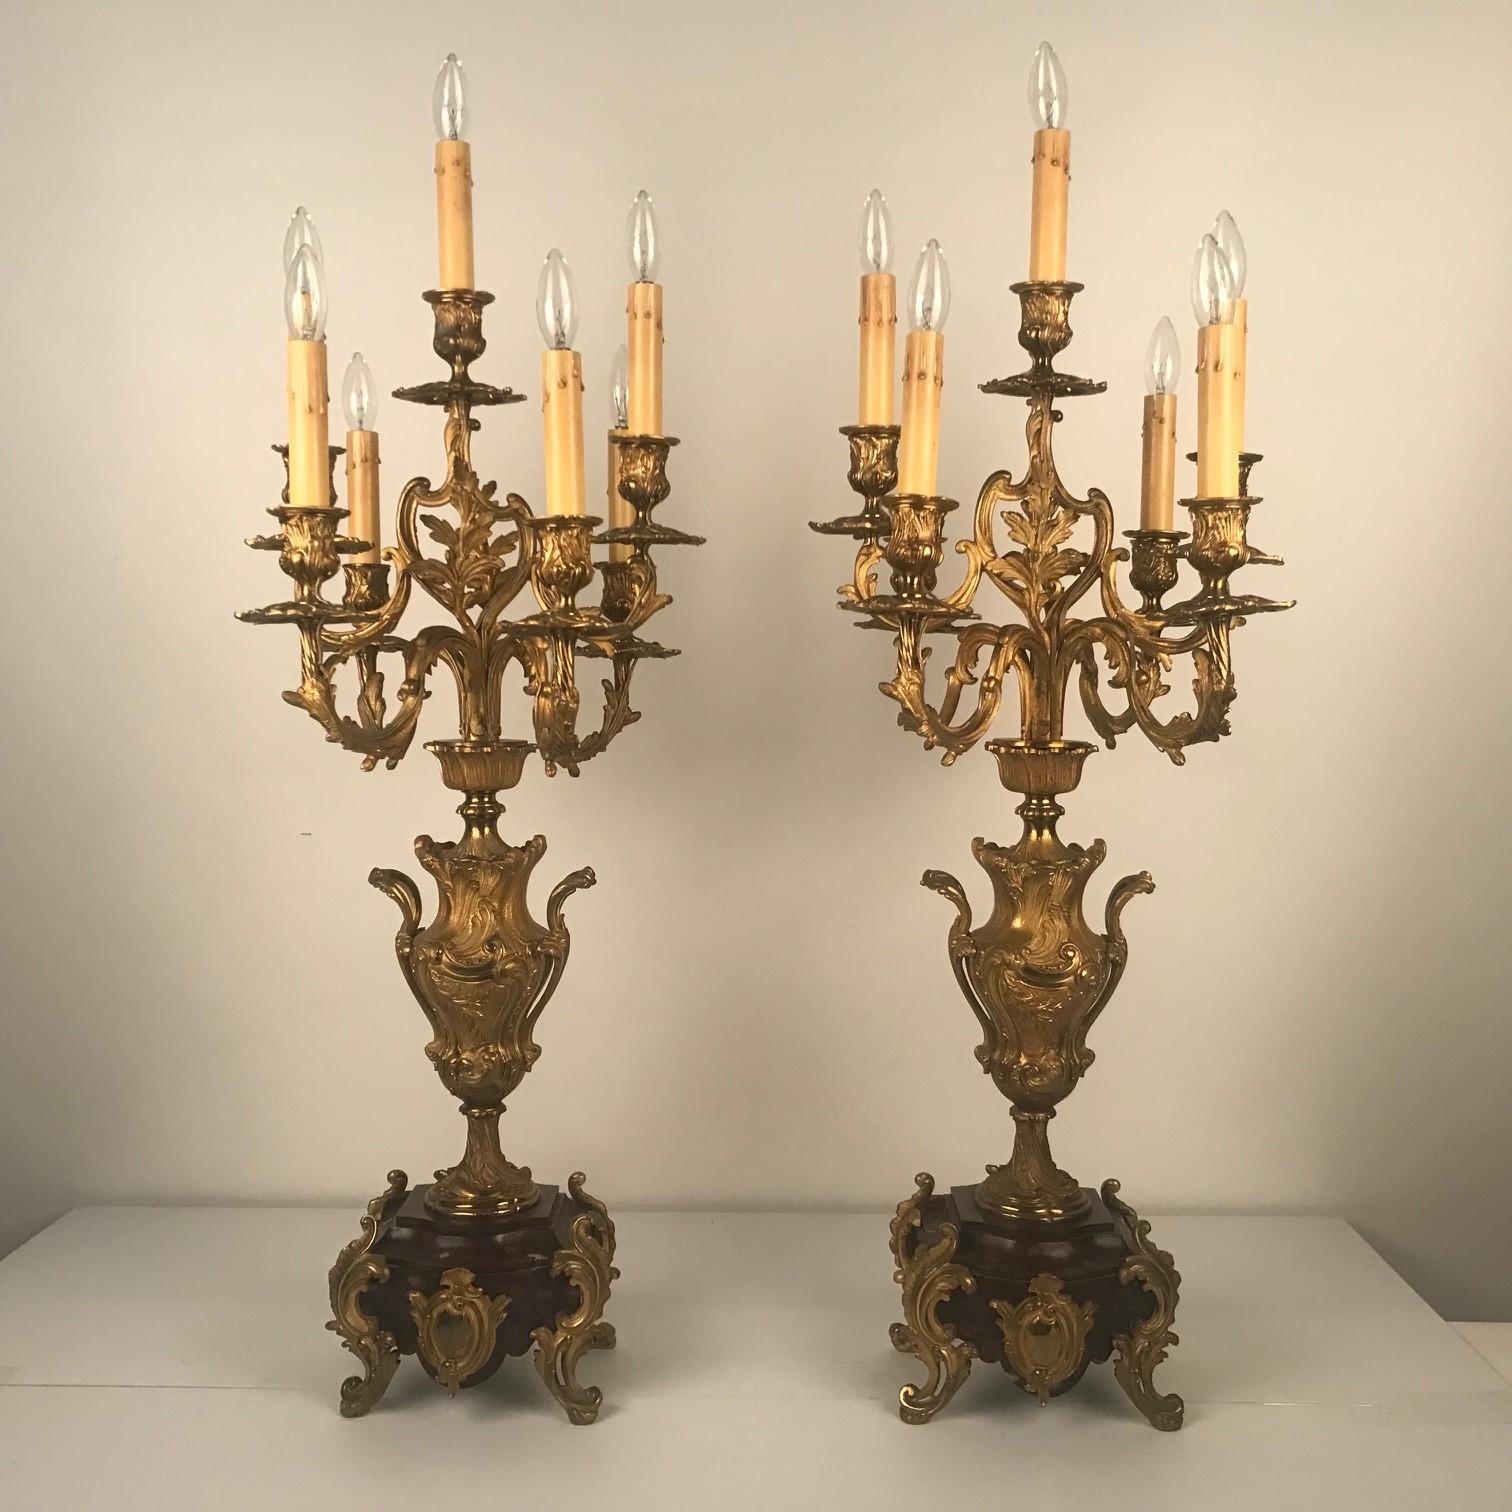 This pair, very much in the Louis XV style, has a number of points of interest : The six arms are arranged around the central light so there are actually seven lights, the vase shaped stem is modelled in bas-relief with leaves, and the base is a